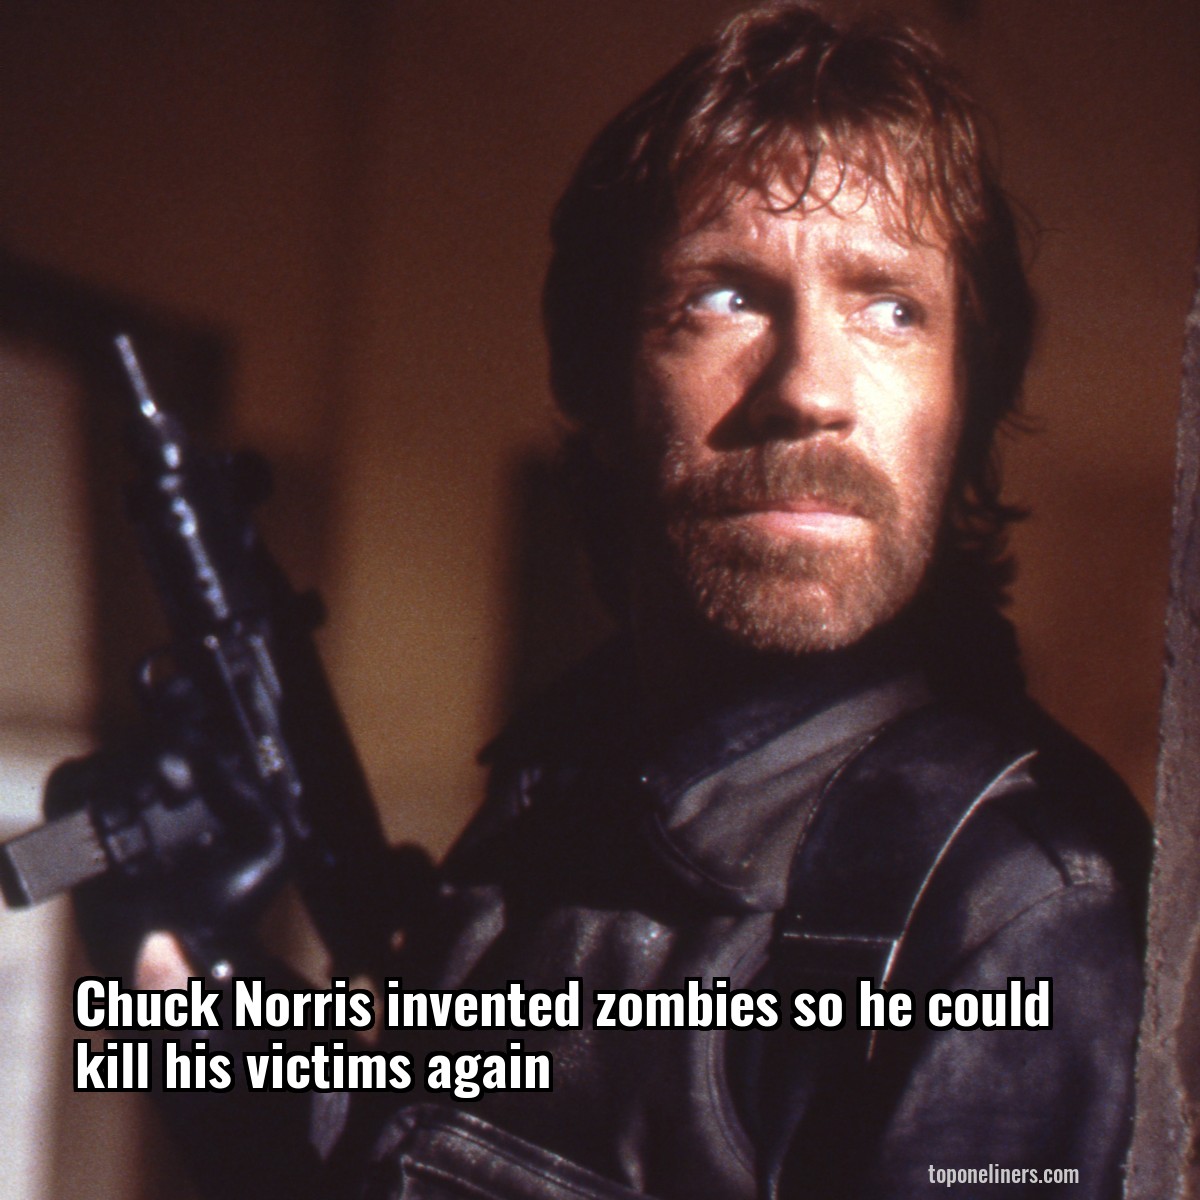 Chuck Norris invented zombies so he could kill his victims again